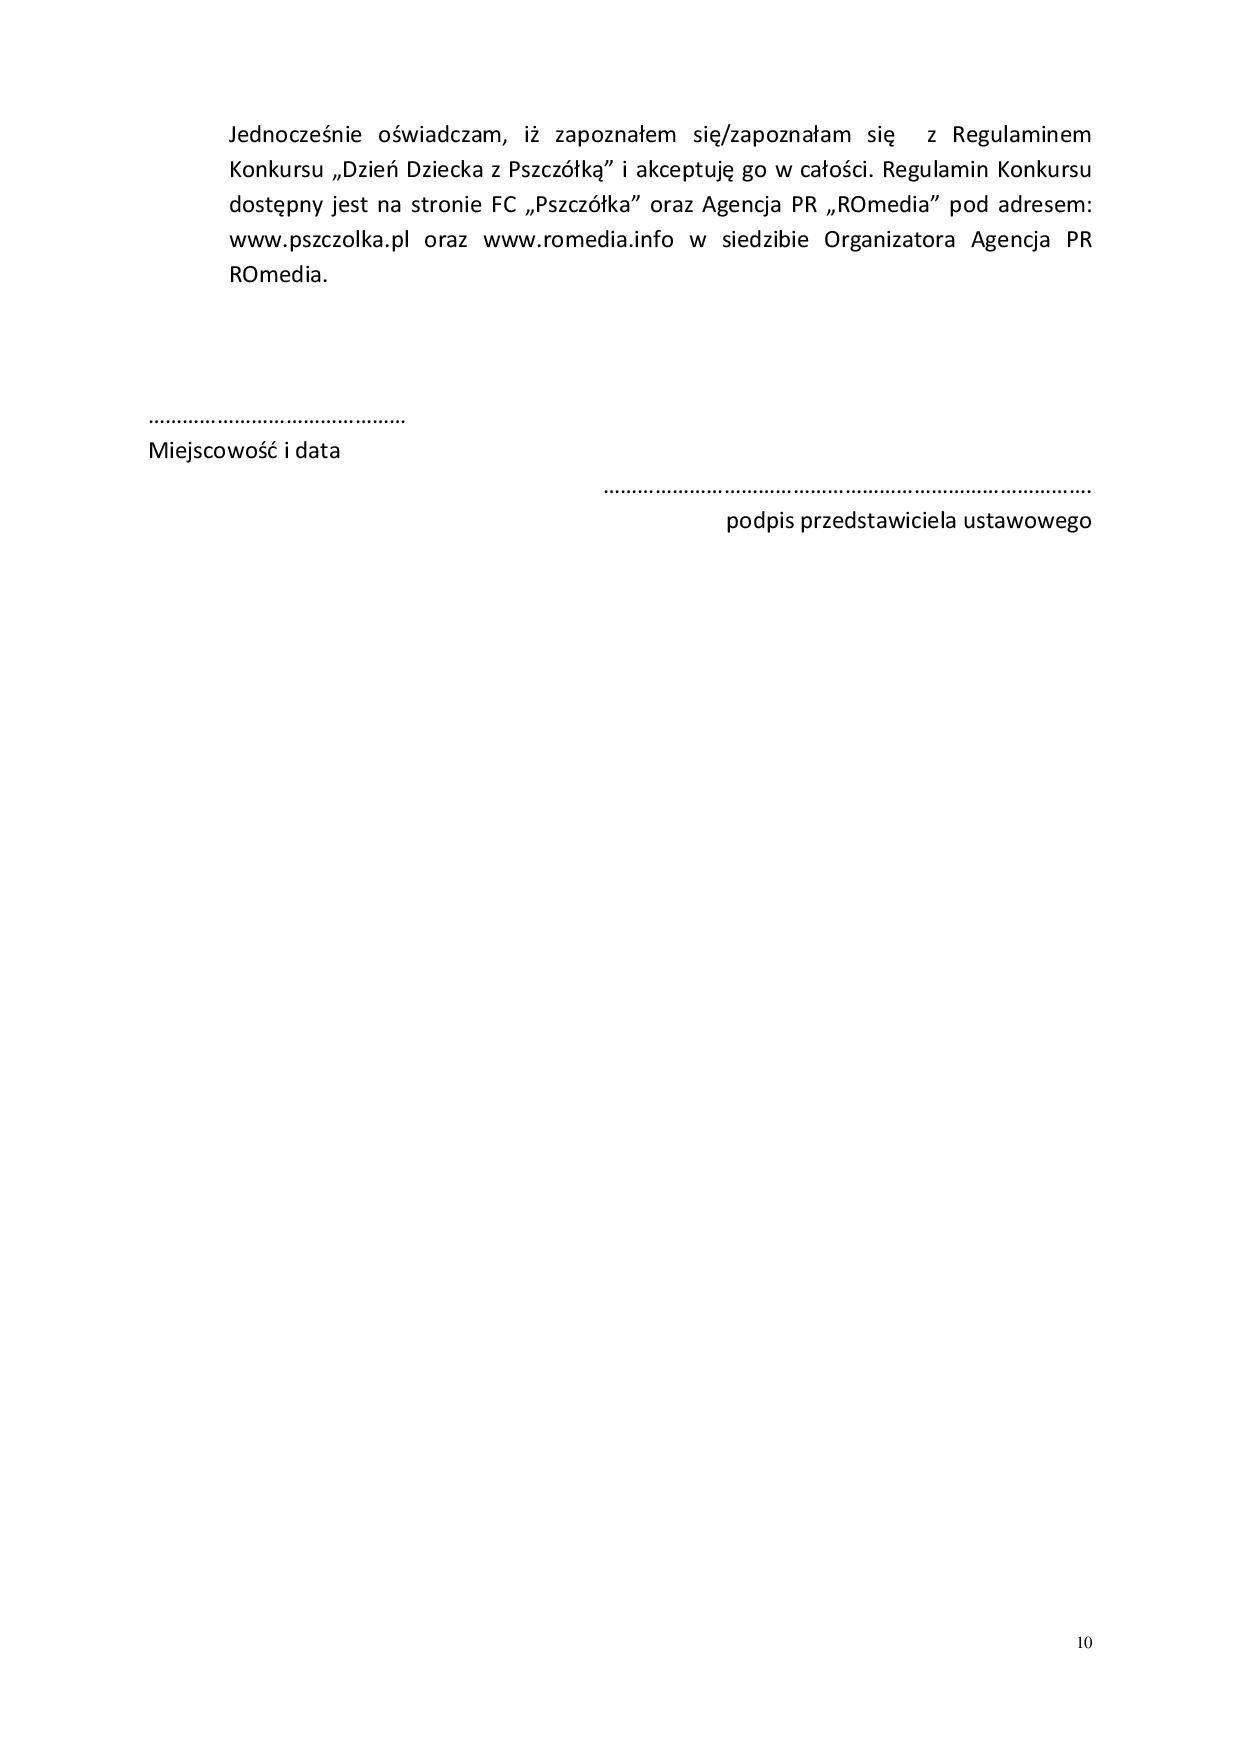 Document-page-010